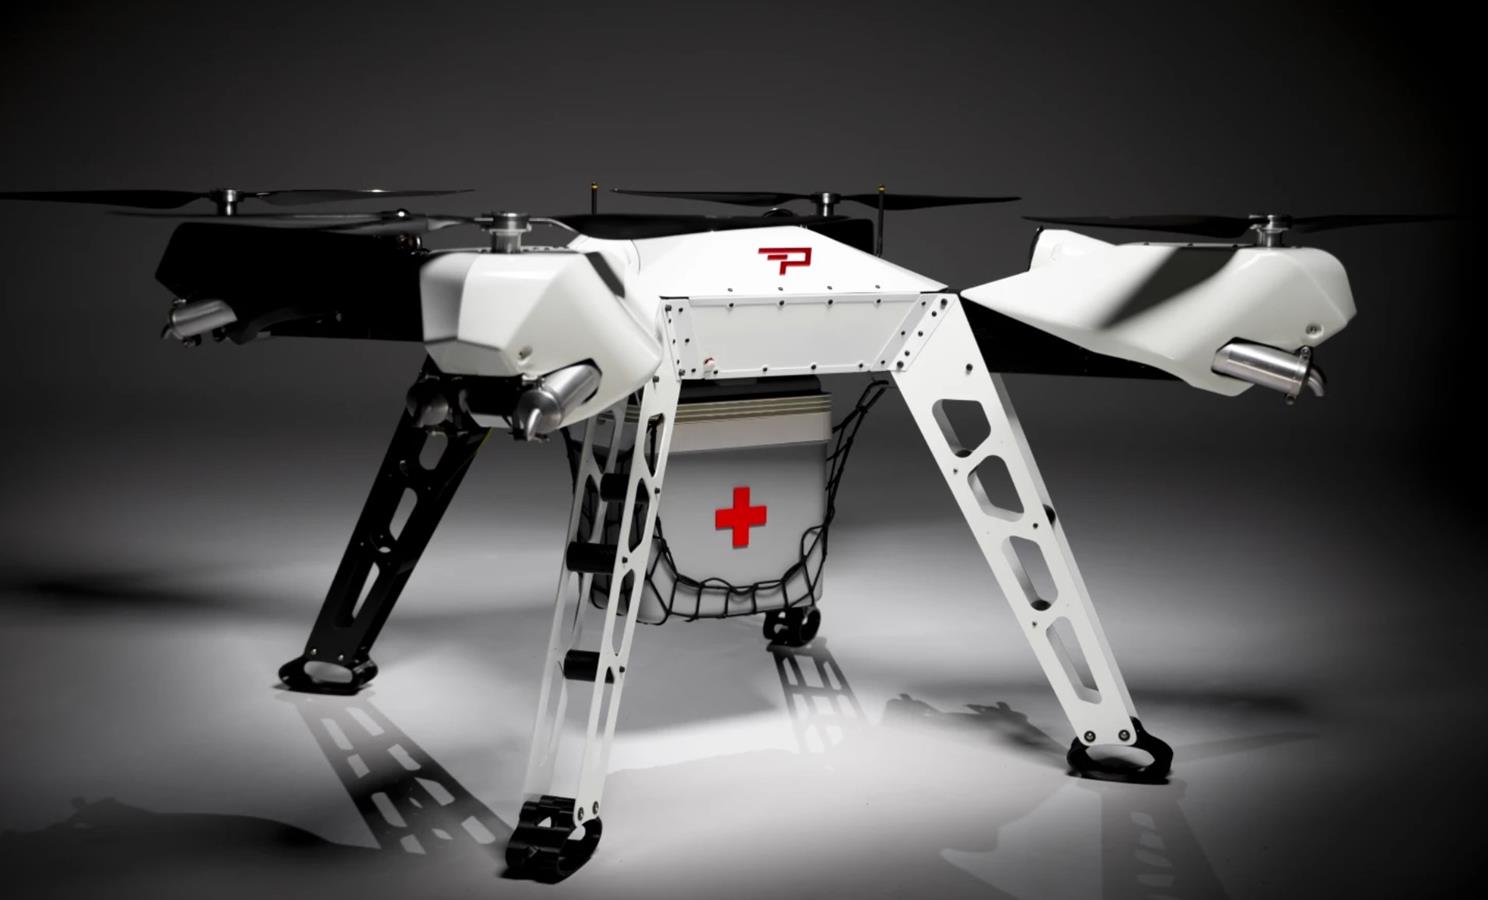 Here is the great flying drone Firefly.  It can extinguish fires or deliver drugs and tools weighing 45 kg